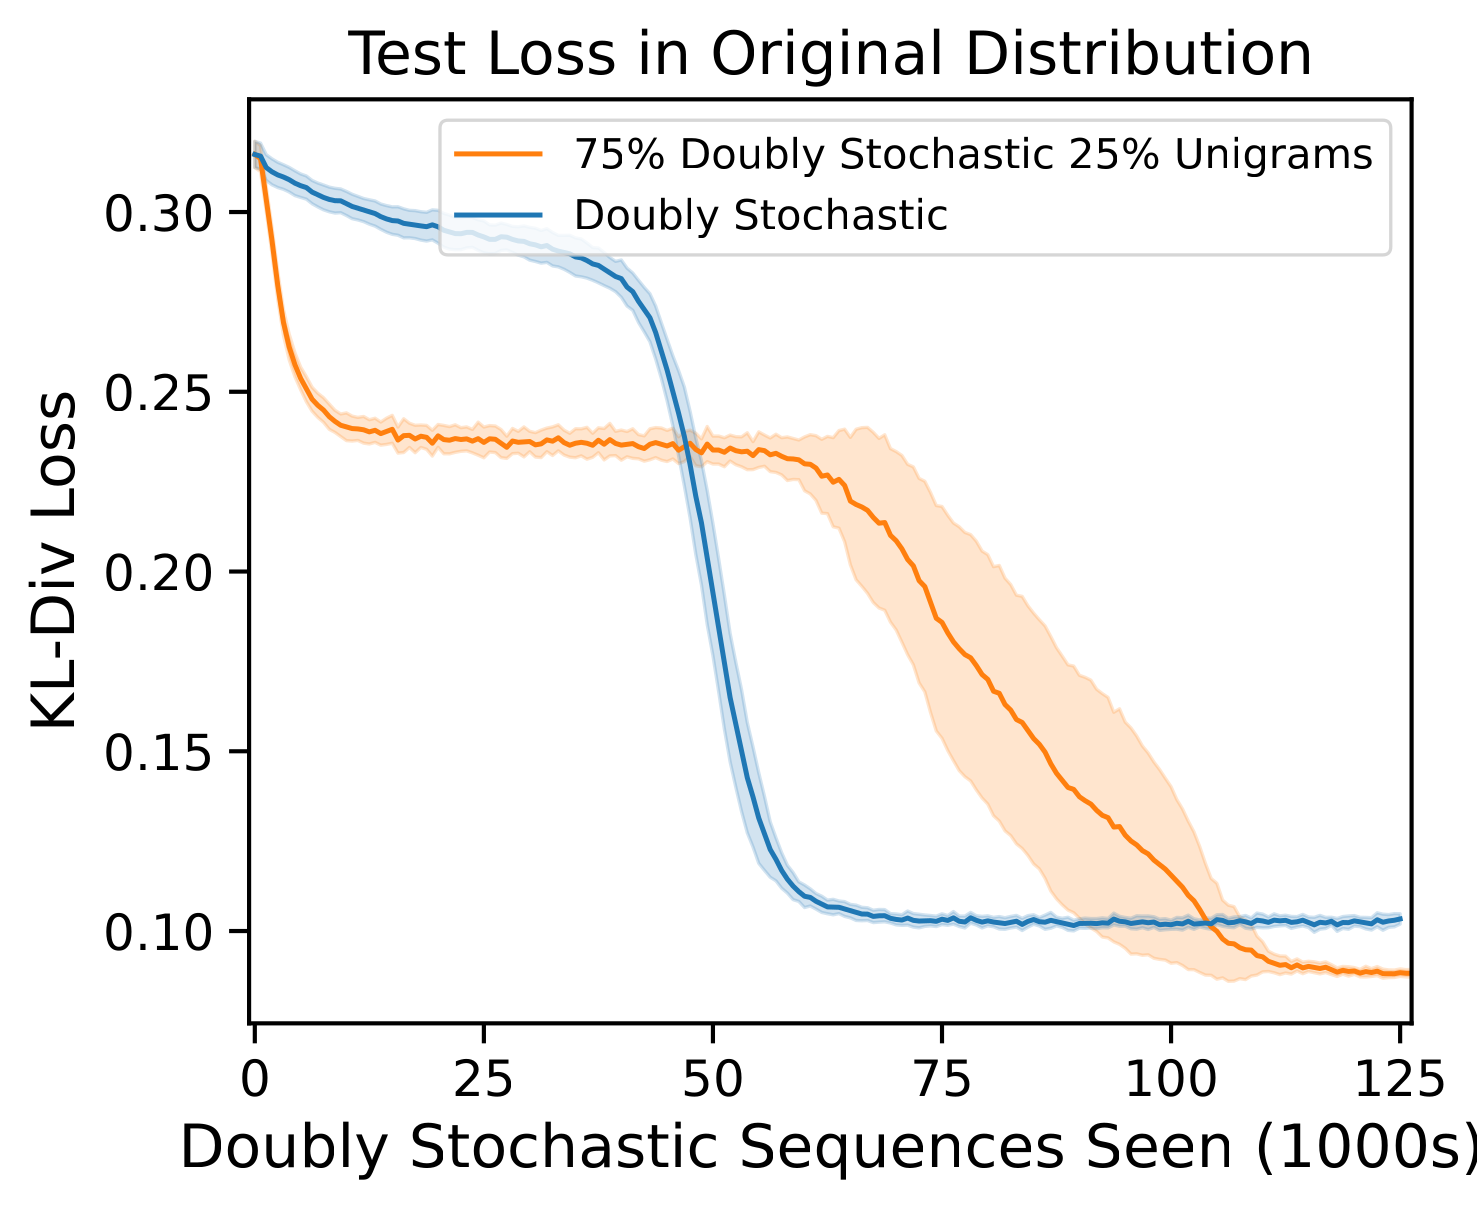 Comparison in test loss (in the original distribution) of a 4 symbol transformer with doubly stochastic training data, and 75% Doubly Stochastic 25% Unigrams. The pure doubly stochastic training data results in faster convergence.